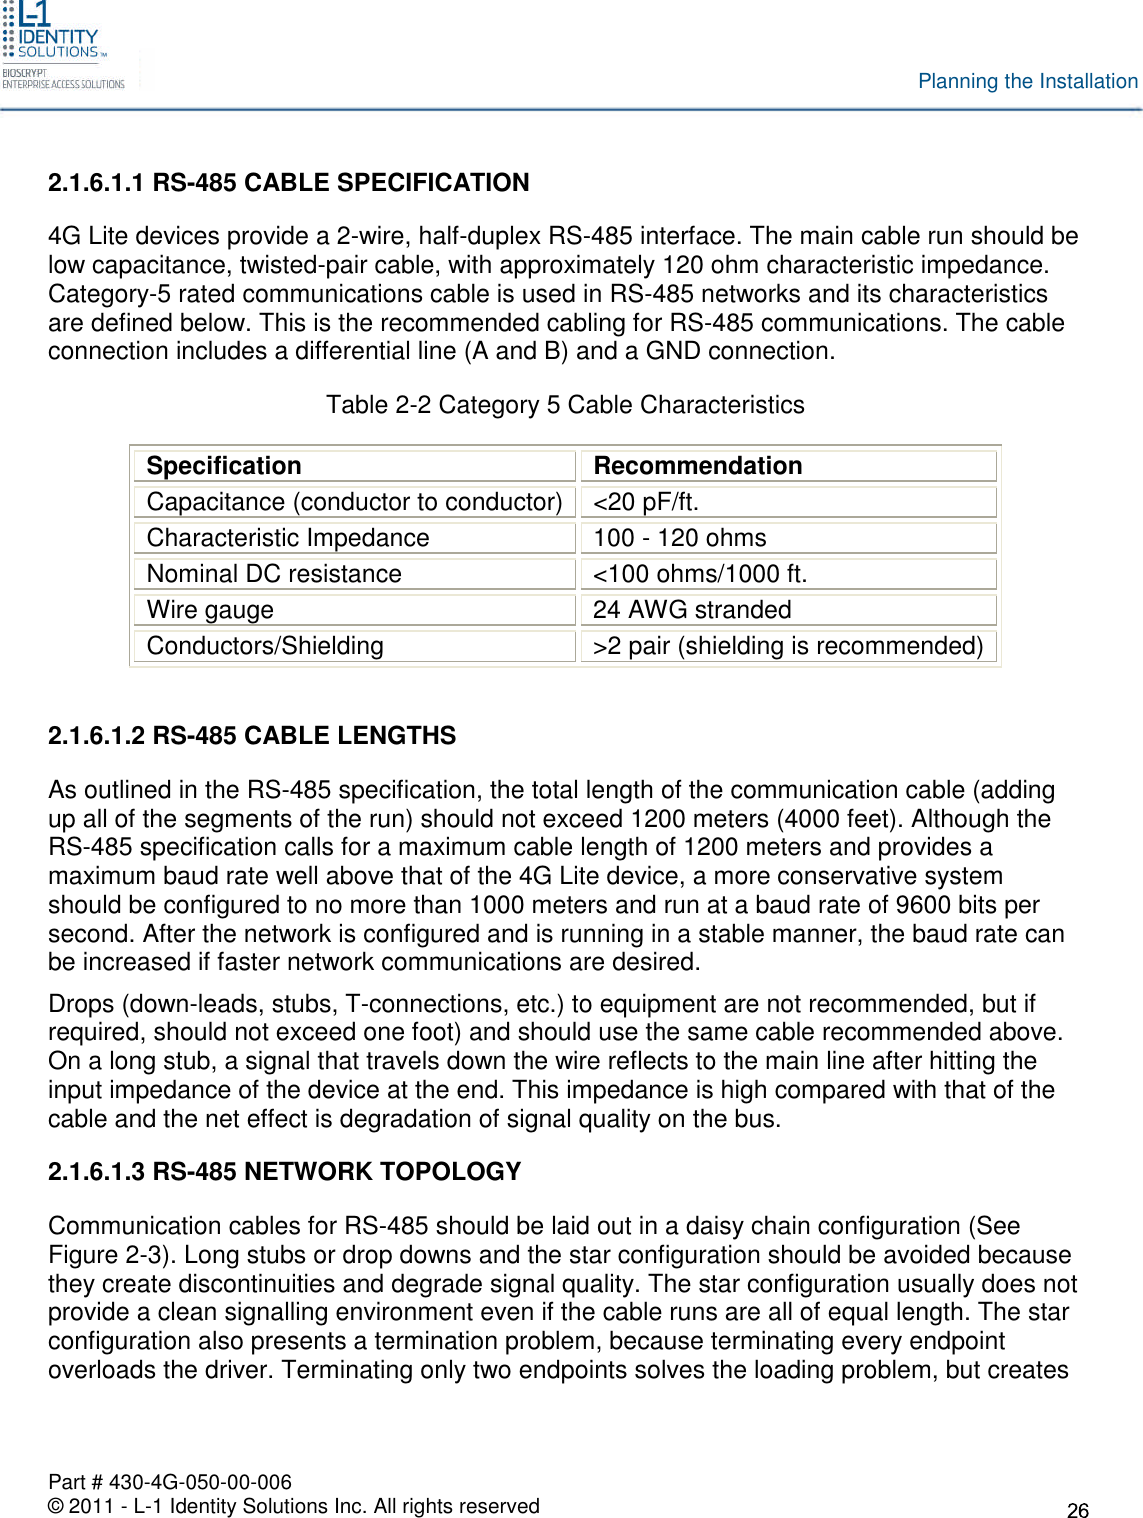 Part # 430-4G-050-00-006© 2011 - L-1 Identity Solutions Inc. All rights reservedPlanning the Installation2.1.6.1.1 RS-485 CABLE SPECIFICATION4G Lite devices provide a 2-wire, half-duplex RS-485 interface. The main cable run should below capacitance, twisted-pair cable, with approximately 120 ohm characteristic impedance.Category-5 rated communications cable is used in RS-485 networks and its characteristicsare defined below. This is the recommended cabling for RS-485 communications. The cableconnection includes a differential line (A and B) and a GND connection.Table 2-2 Category 5 Cable CharacteristicsSpecificationRecommendationCapacitance (conductor to conductor) &lt;20 pF/ft.Characteristic Impedance 100 - 120 ohmsNominal DC resistance &lt;100 ohms/1000 ft.Wire gauge 24 AWG strandedConductors/Shielding &gt;2 pair (shielding is recommended)2.1.6.1.2 RS-485 CABLE LENGTHSAs outlined in the RS-485 specification, the total length of the communication cable (addingup all of the segments of the run) should not exceed 1200 meters (4000 feet). Although theRS-485 specification calls for a maximum cable length of 1200 meters and provides amaximum baud rate well above that of the 4G Lite device, a more conservative systemshould be configured to no more than 1000 meters and run at a baud rate of 9600 bits persecond. After the network is configured and is running in a stable manner, the baud rate canbe increased if faster network communications are desired.Drops (down-leads, stubs, T-connections, etc.) to equipment are not recommended, but ifrequired, should not exceed one foot) and should use the same cable recommended above.On a long stub, a signal that travels down the wire reflects to the main line after hitting theinput impedance of the device at the end. This impedance is high compared with that of thecable and the net effect is degradation of signal quality on the bus.2.1.6.1.3 RS-485 NETWORK TOPOLOGYCommunication cables for RS-485 should be laid out in a daisy chain configuration (SeeFigure 2-3). Long stubs or drop downs and the star configuration should be avoided becausethey create discontinuities and degrade signal quality. The star configuration usually does notprovide a clean signalling environment even if the cable runs are all of equal length. The starconfiguration also presents a termination problem, because terminating every endpointoverloads the driver. Terminating only two endpoints solves the loading problem, but creates